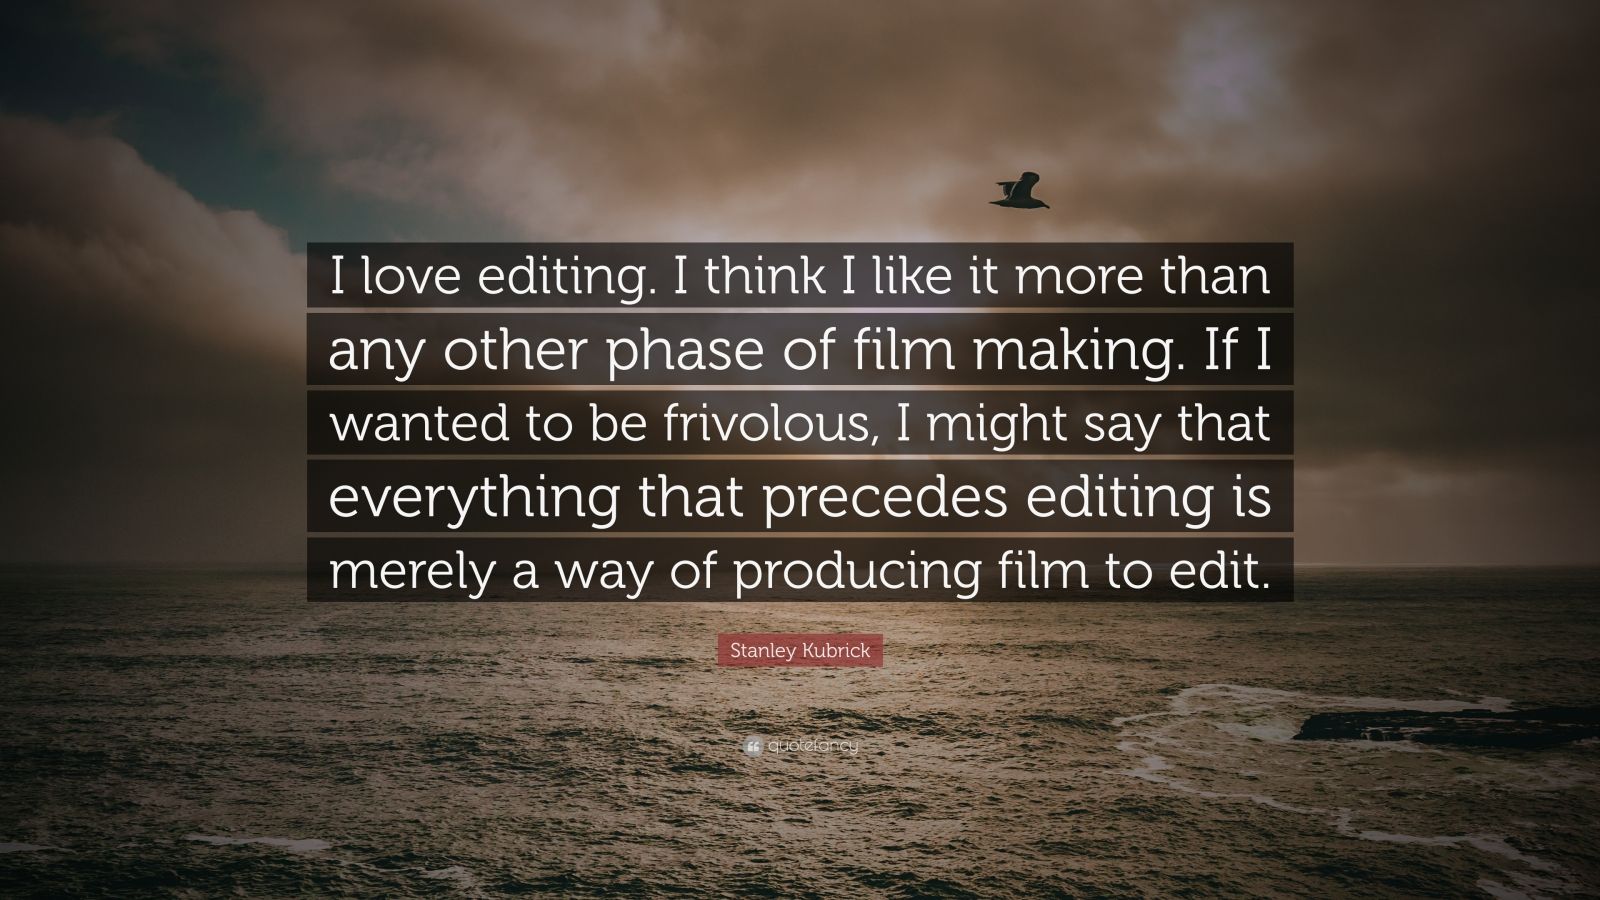 Stanley Kubrick Quote: “I love editing. I think I like it more than any